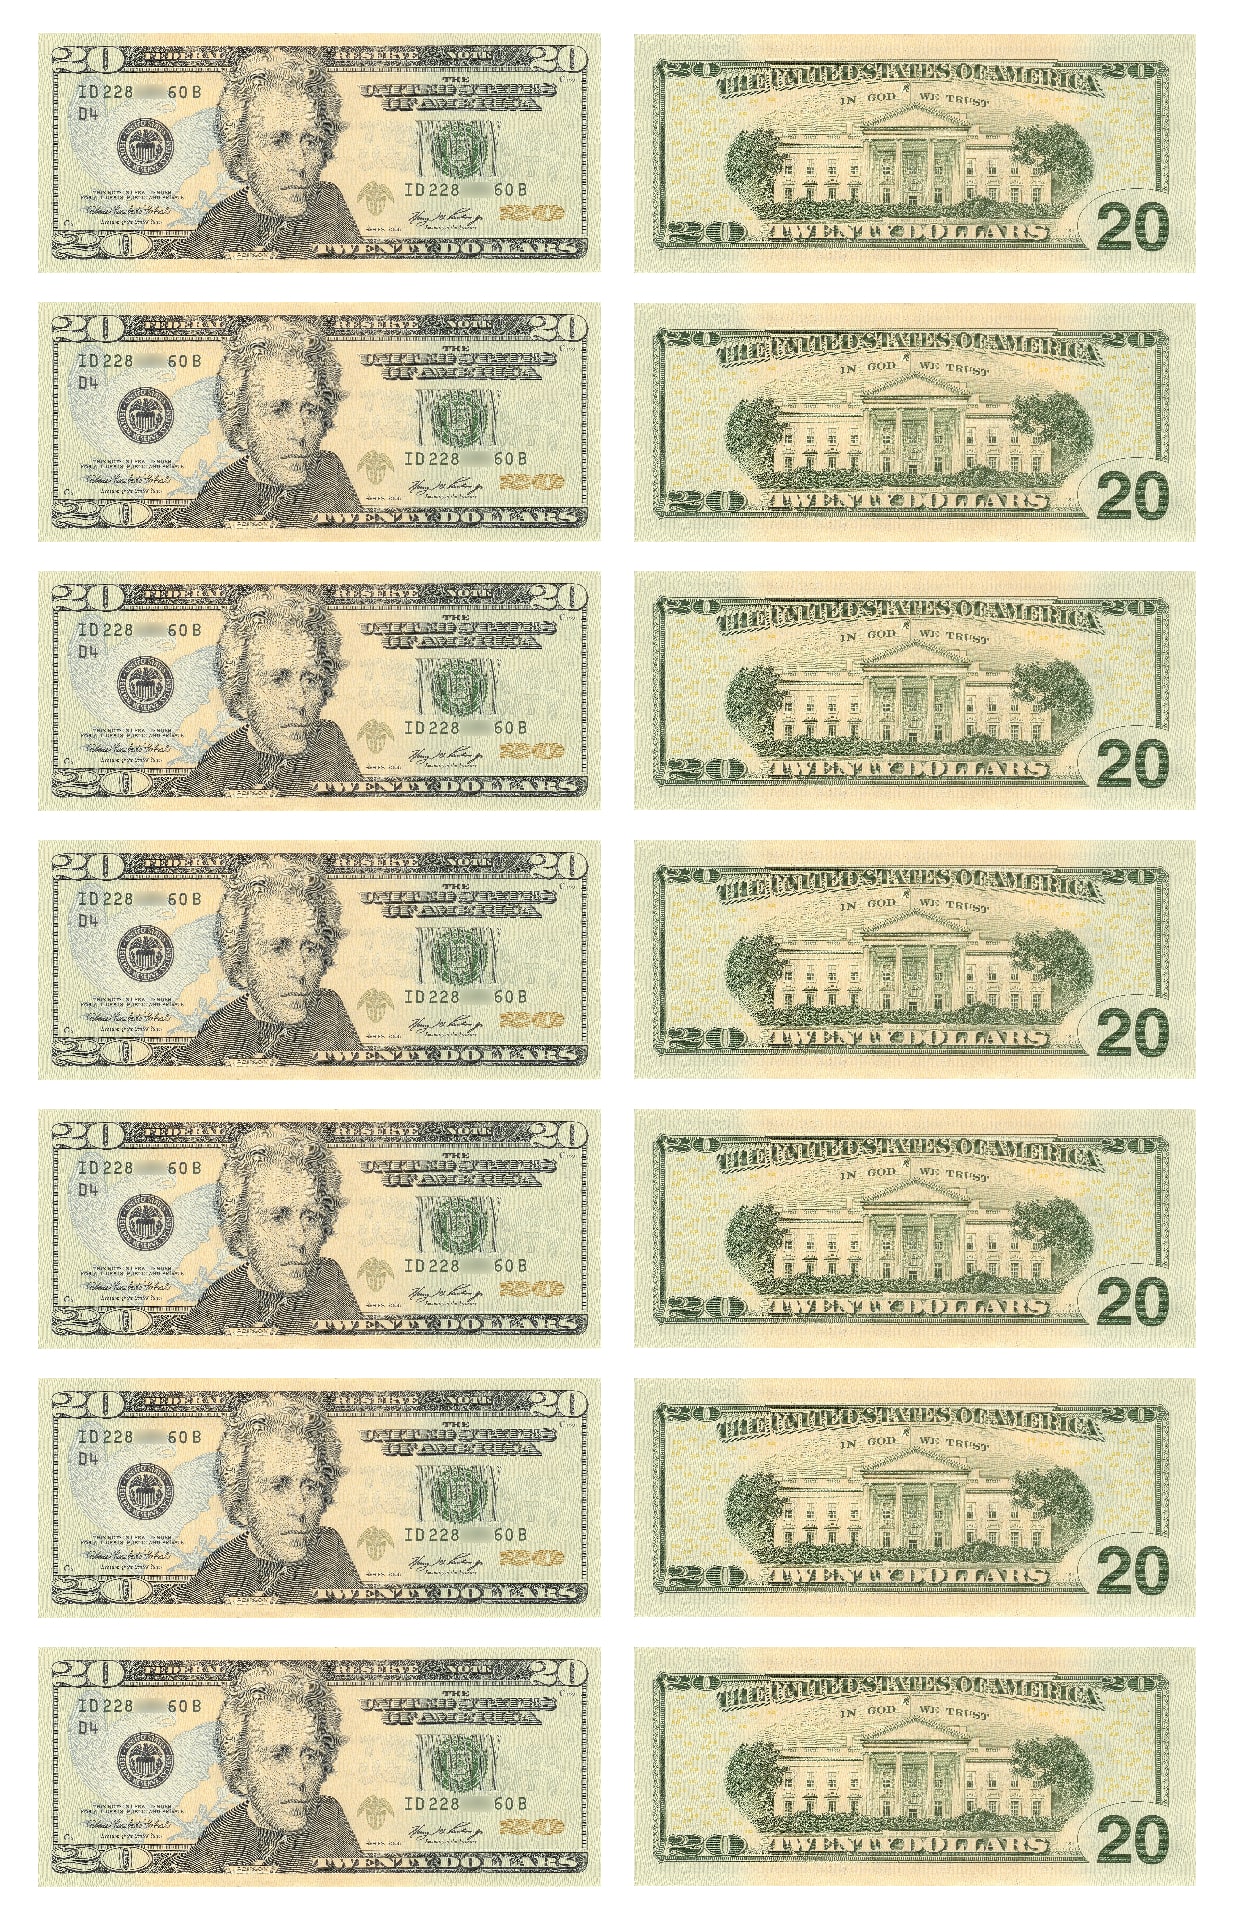 these printable play money sheets can be cutup and used for classroom